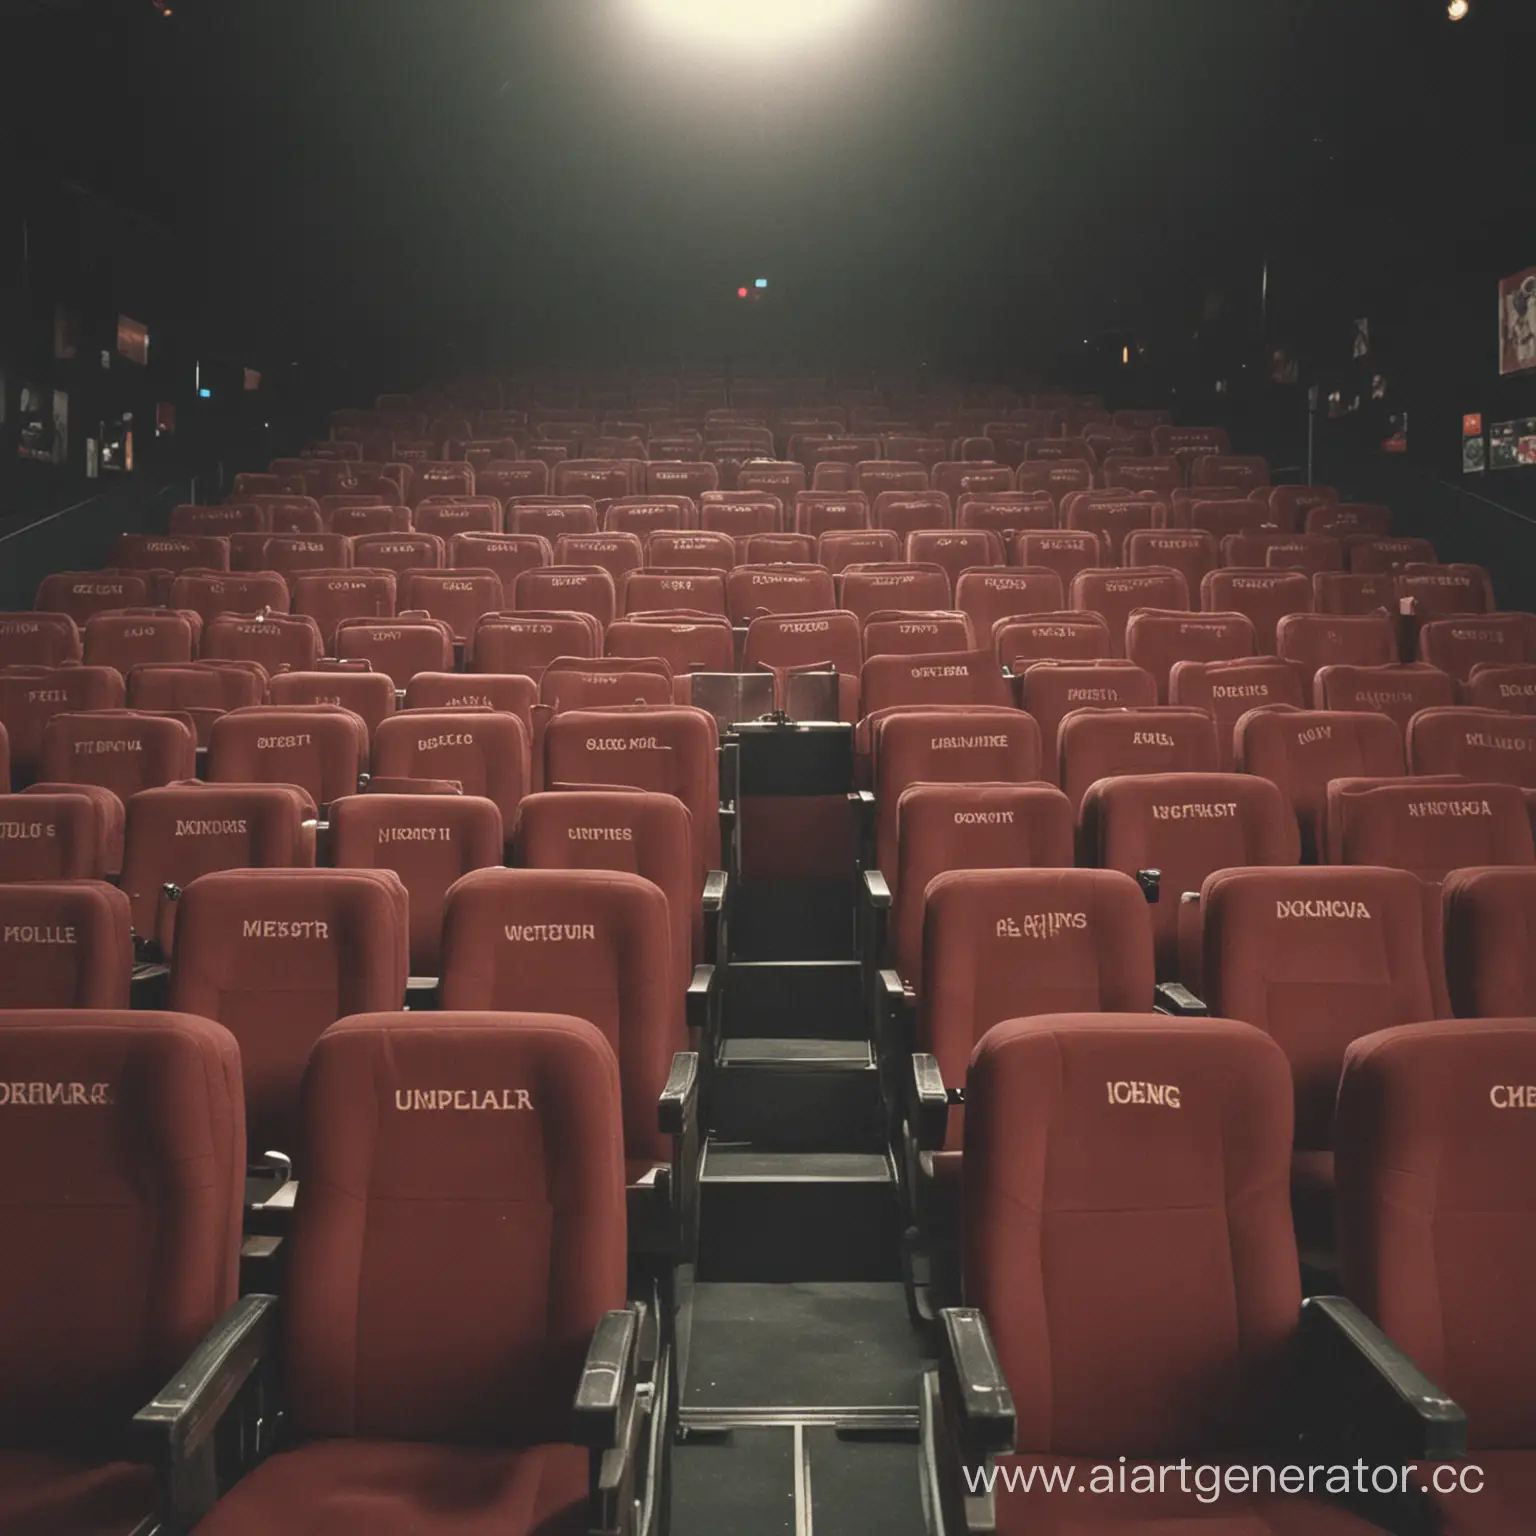 Abandoned-Movie-Theater-Interior-with-Dilapidated-Seating